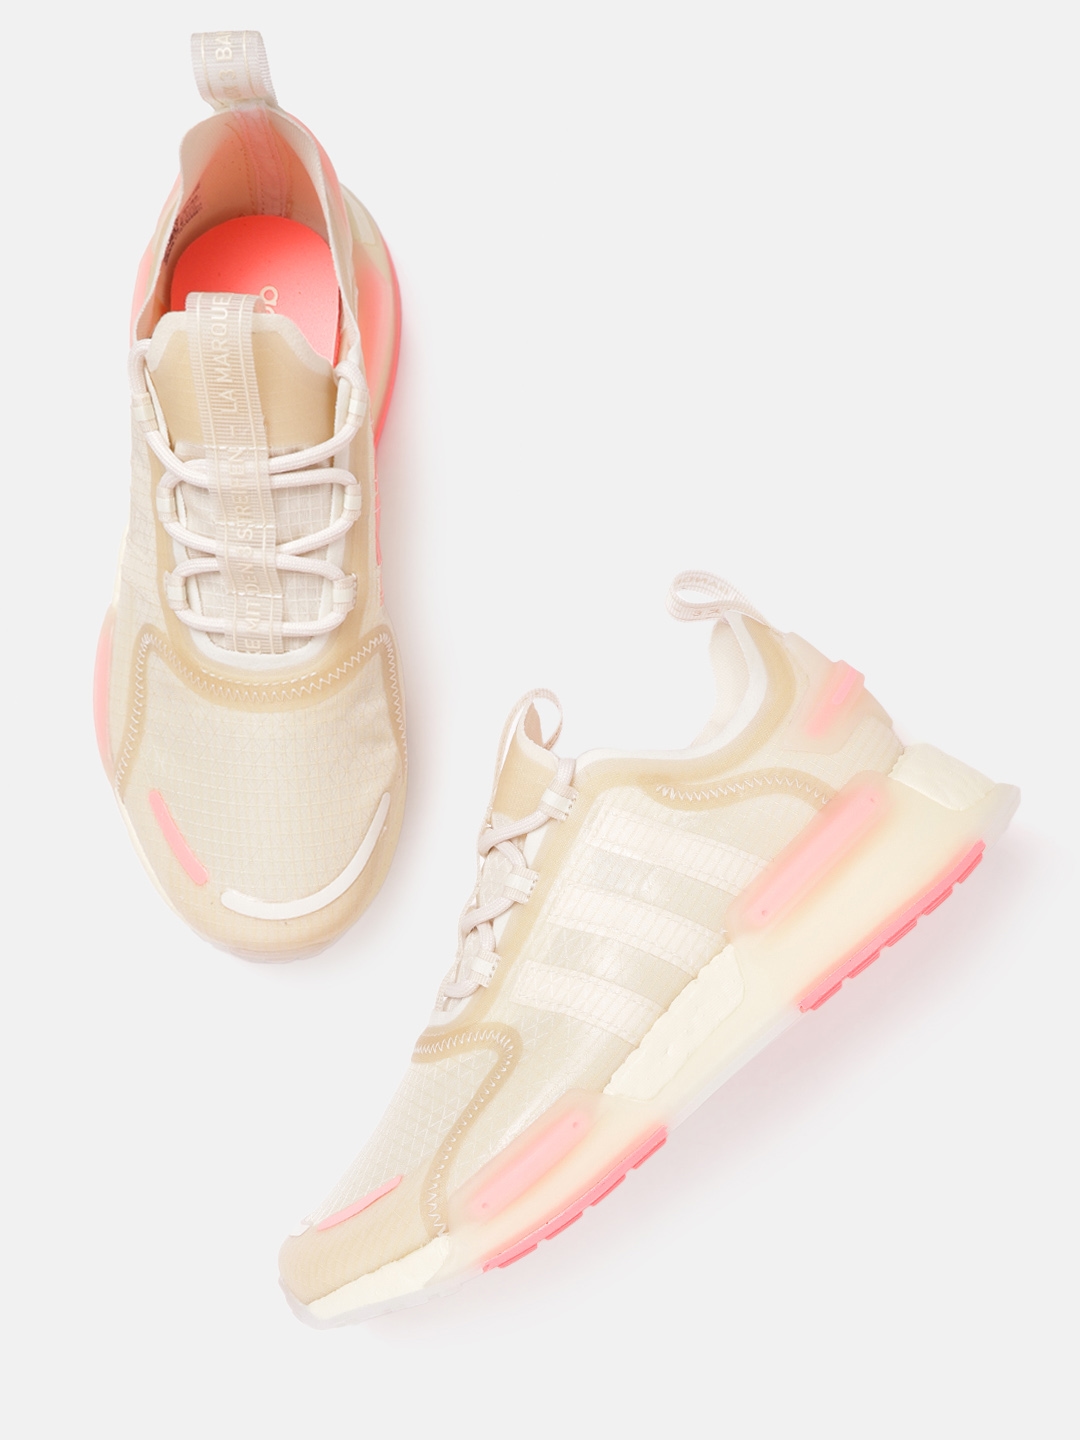 ADIDAS Originals Women Cream-Coloured & Pink Boost Nmd R1 V3 Sustainable Training Shoes